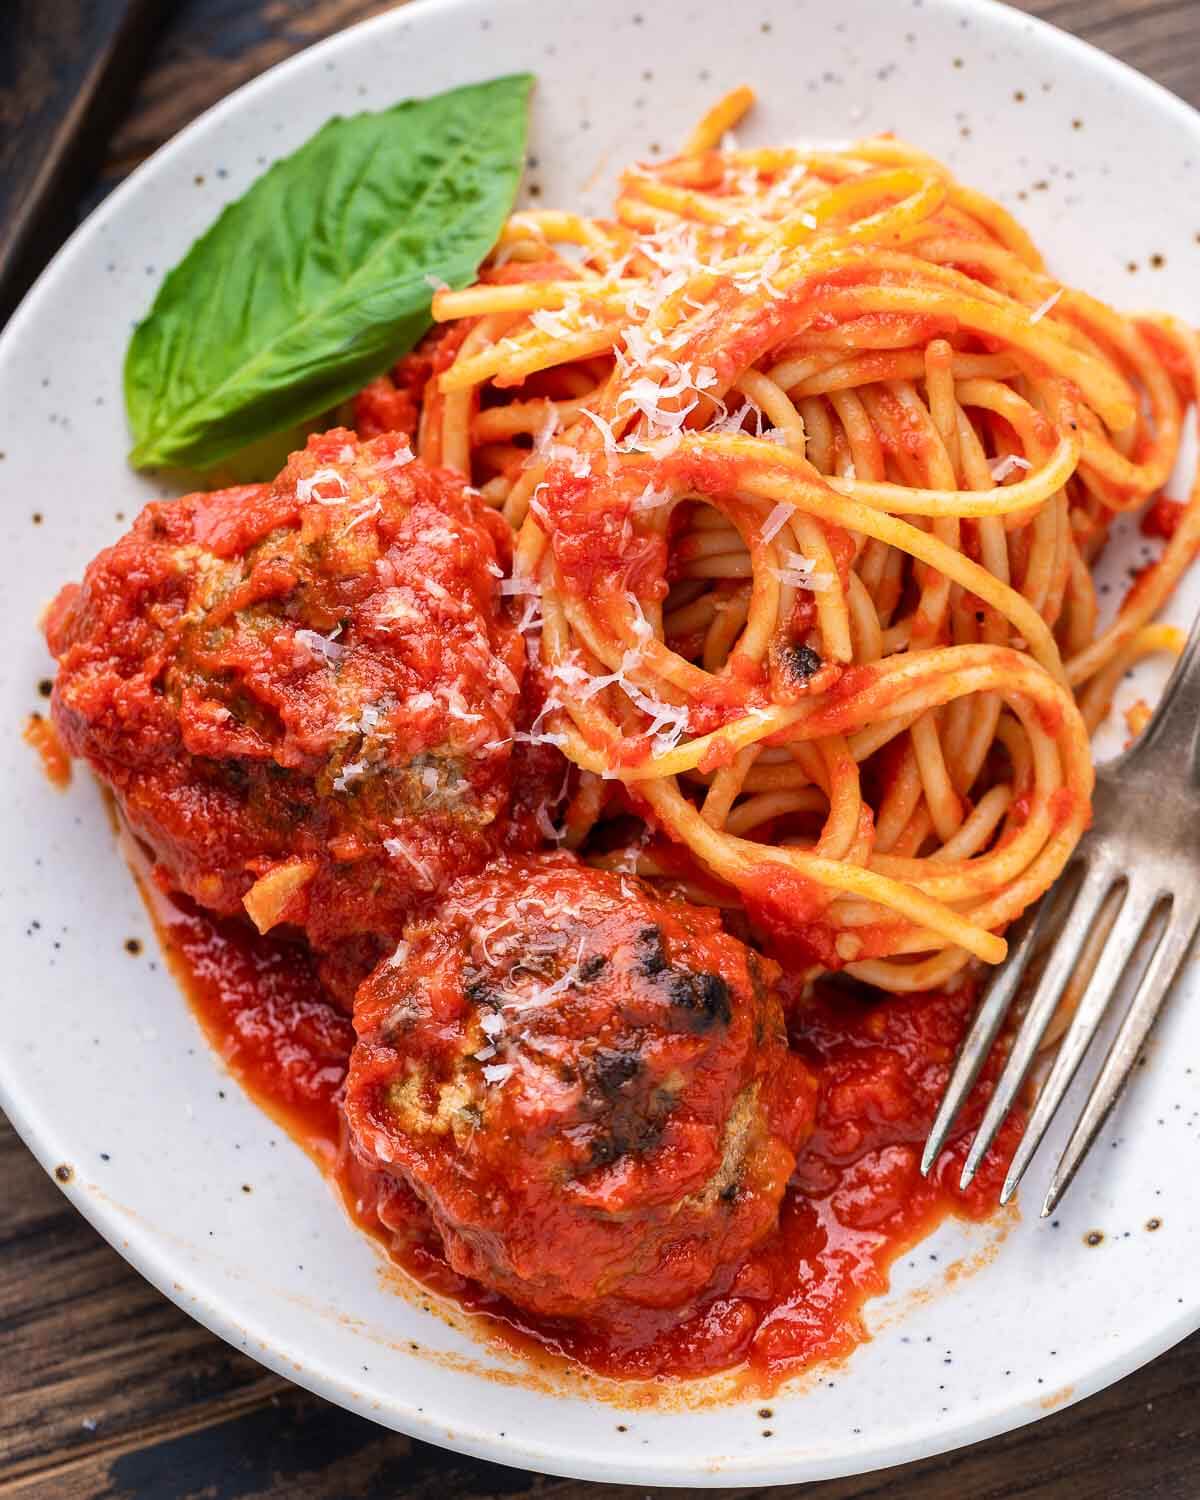 Spaghetti and meatballs on white plate with basil garnish.